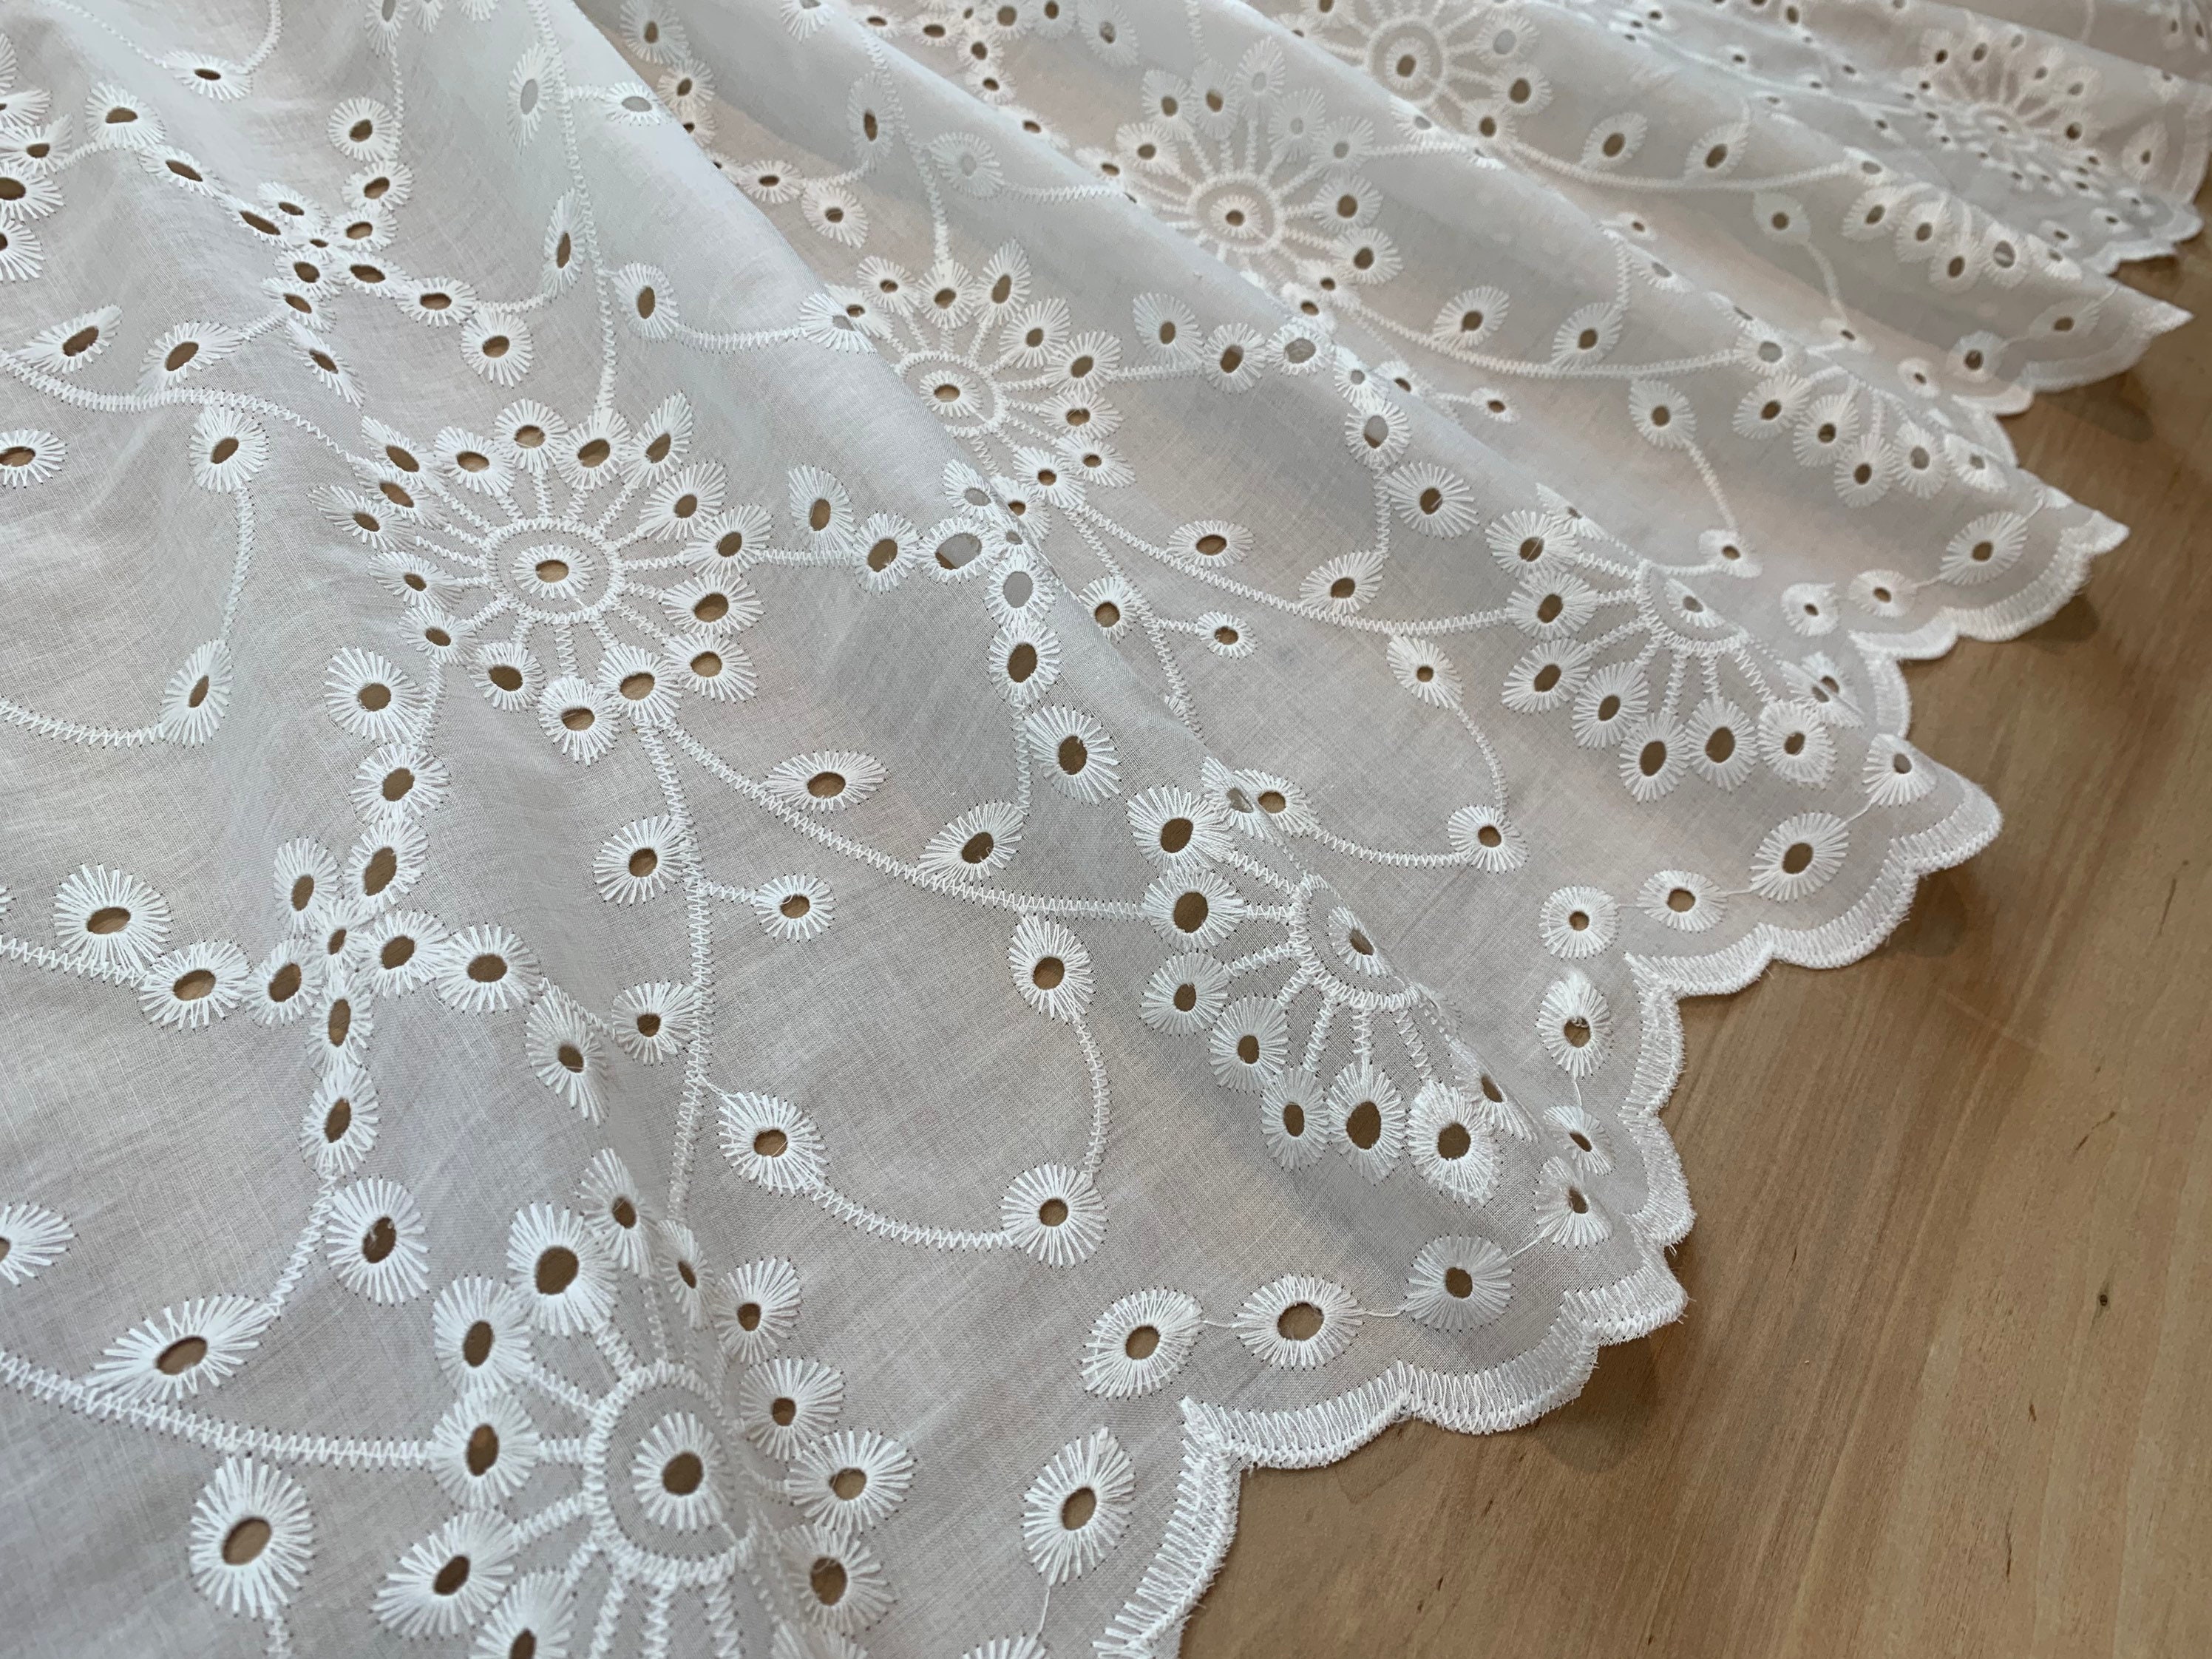 Cotton Fabric Retro Eyelet Flower Cotton Lace Fabric in off White for Boho  Dress, Girl Dress, Tablecloth or Curtains, by 1 Yard 